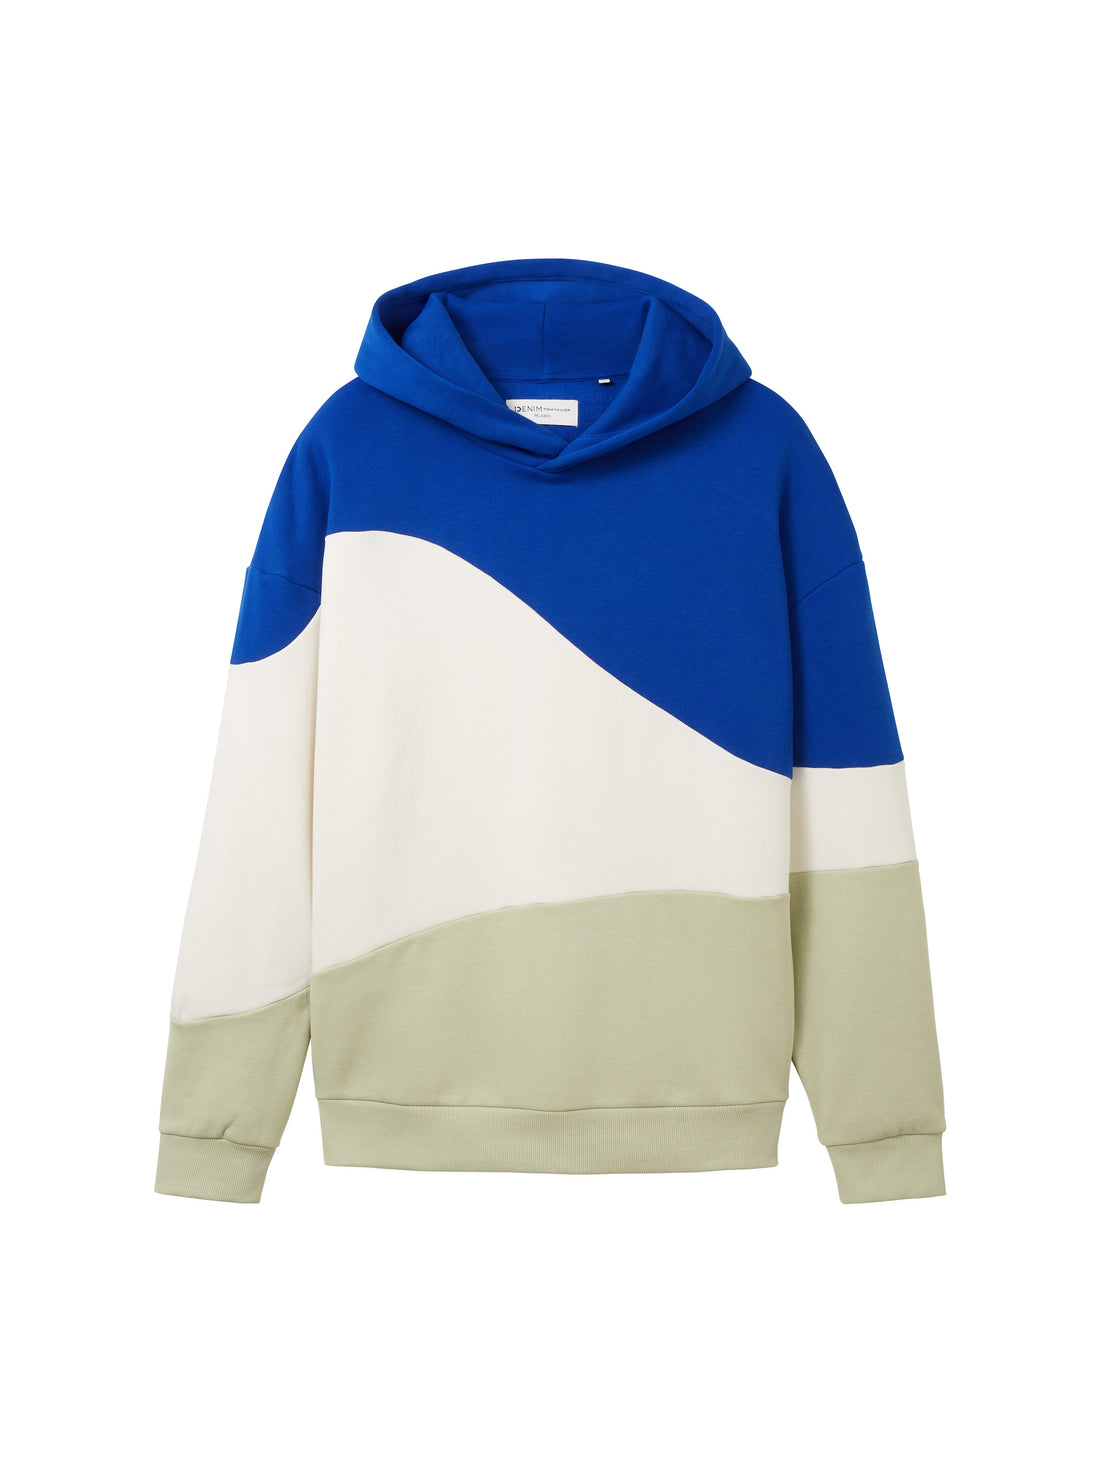 Relaxed Colorblock Hoodie_1037604_14531_01